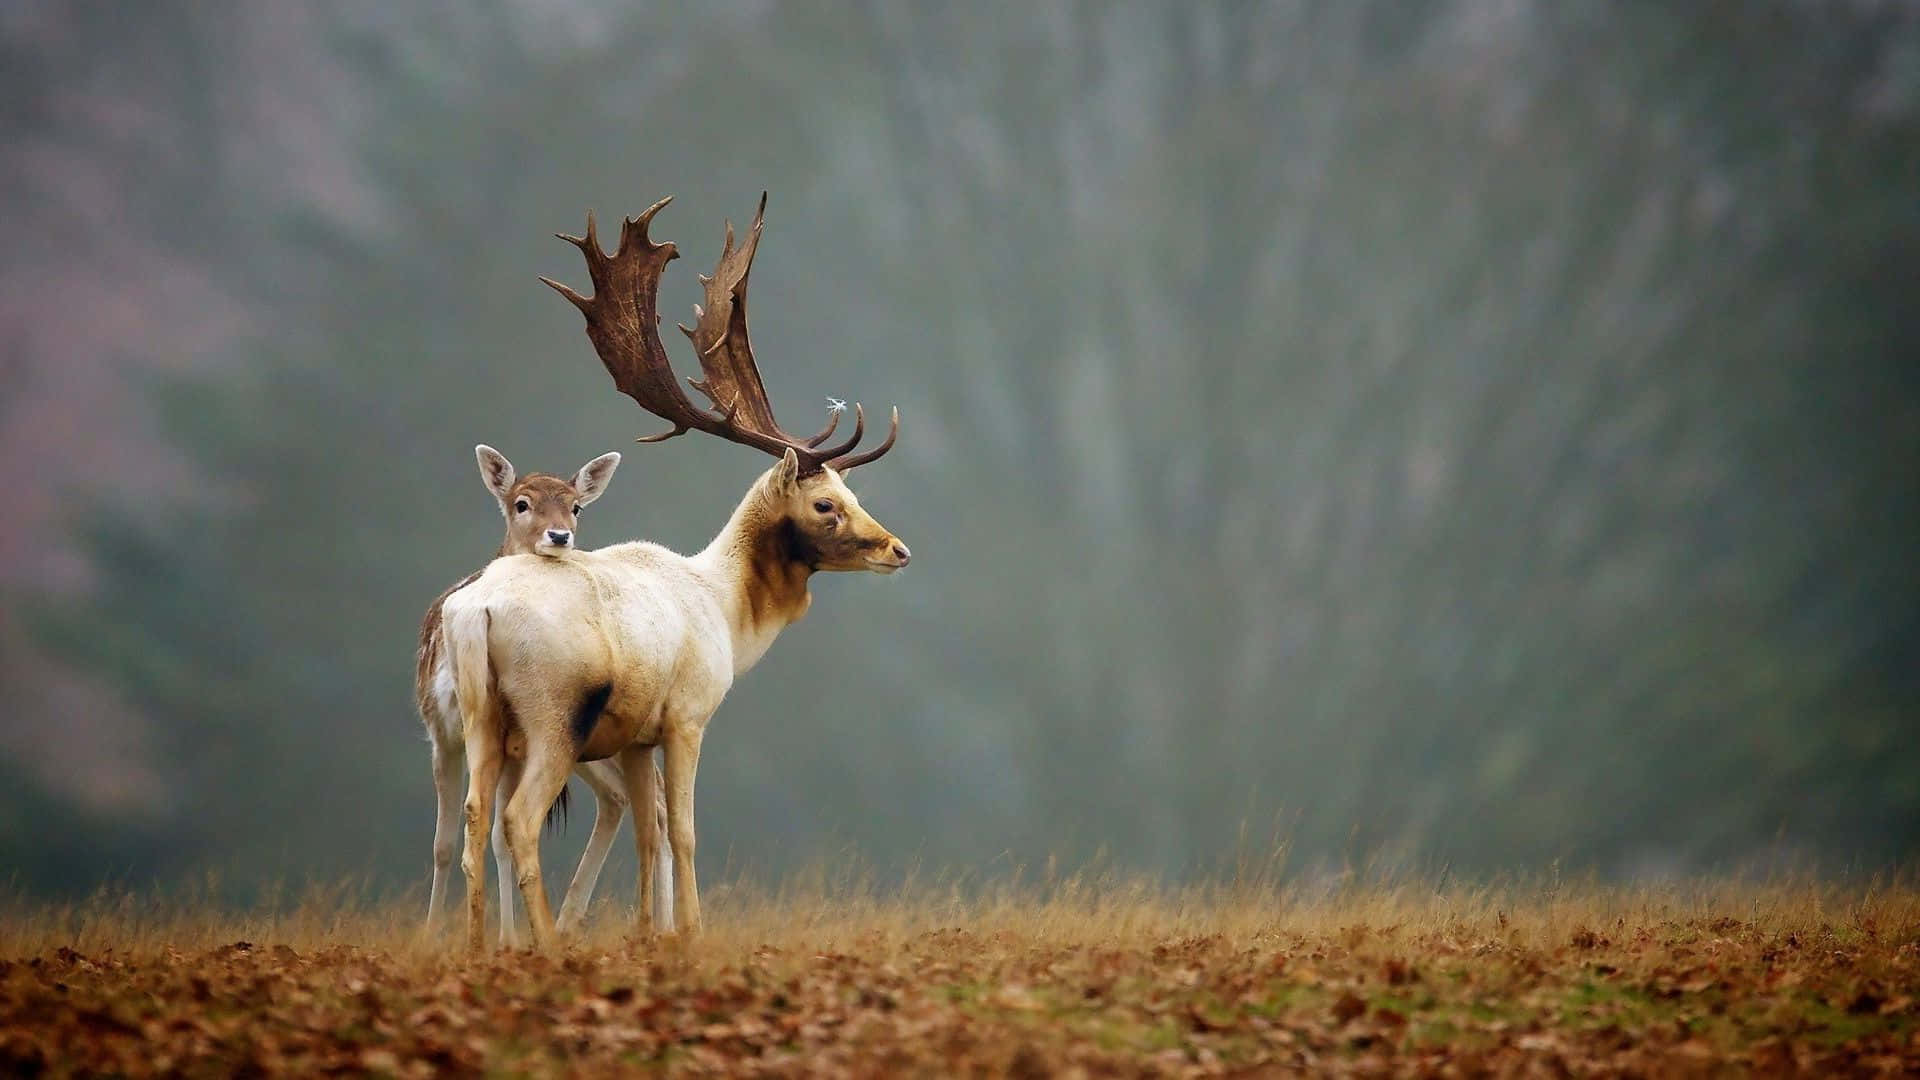 A Deer And A Calf Standing In A Field